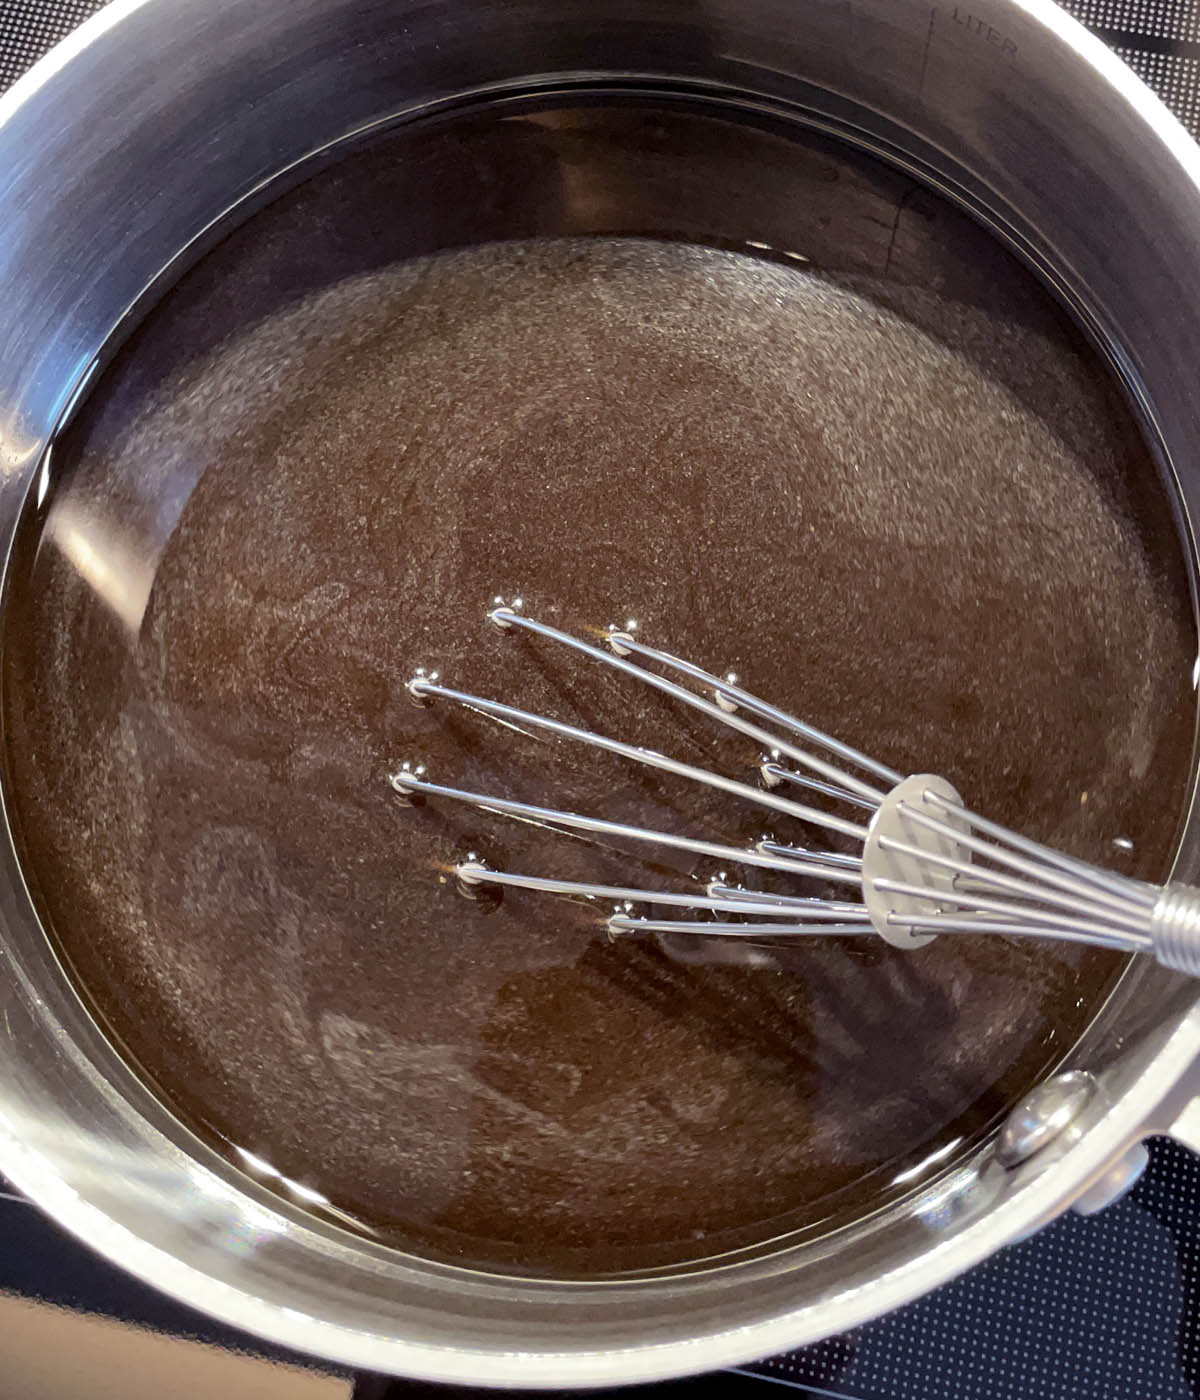 A metal whisk in a metal pot with brown liquid.